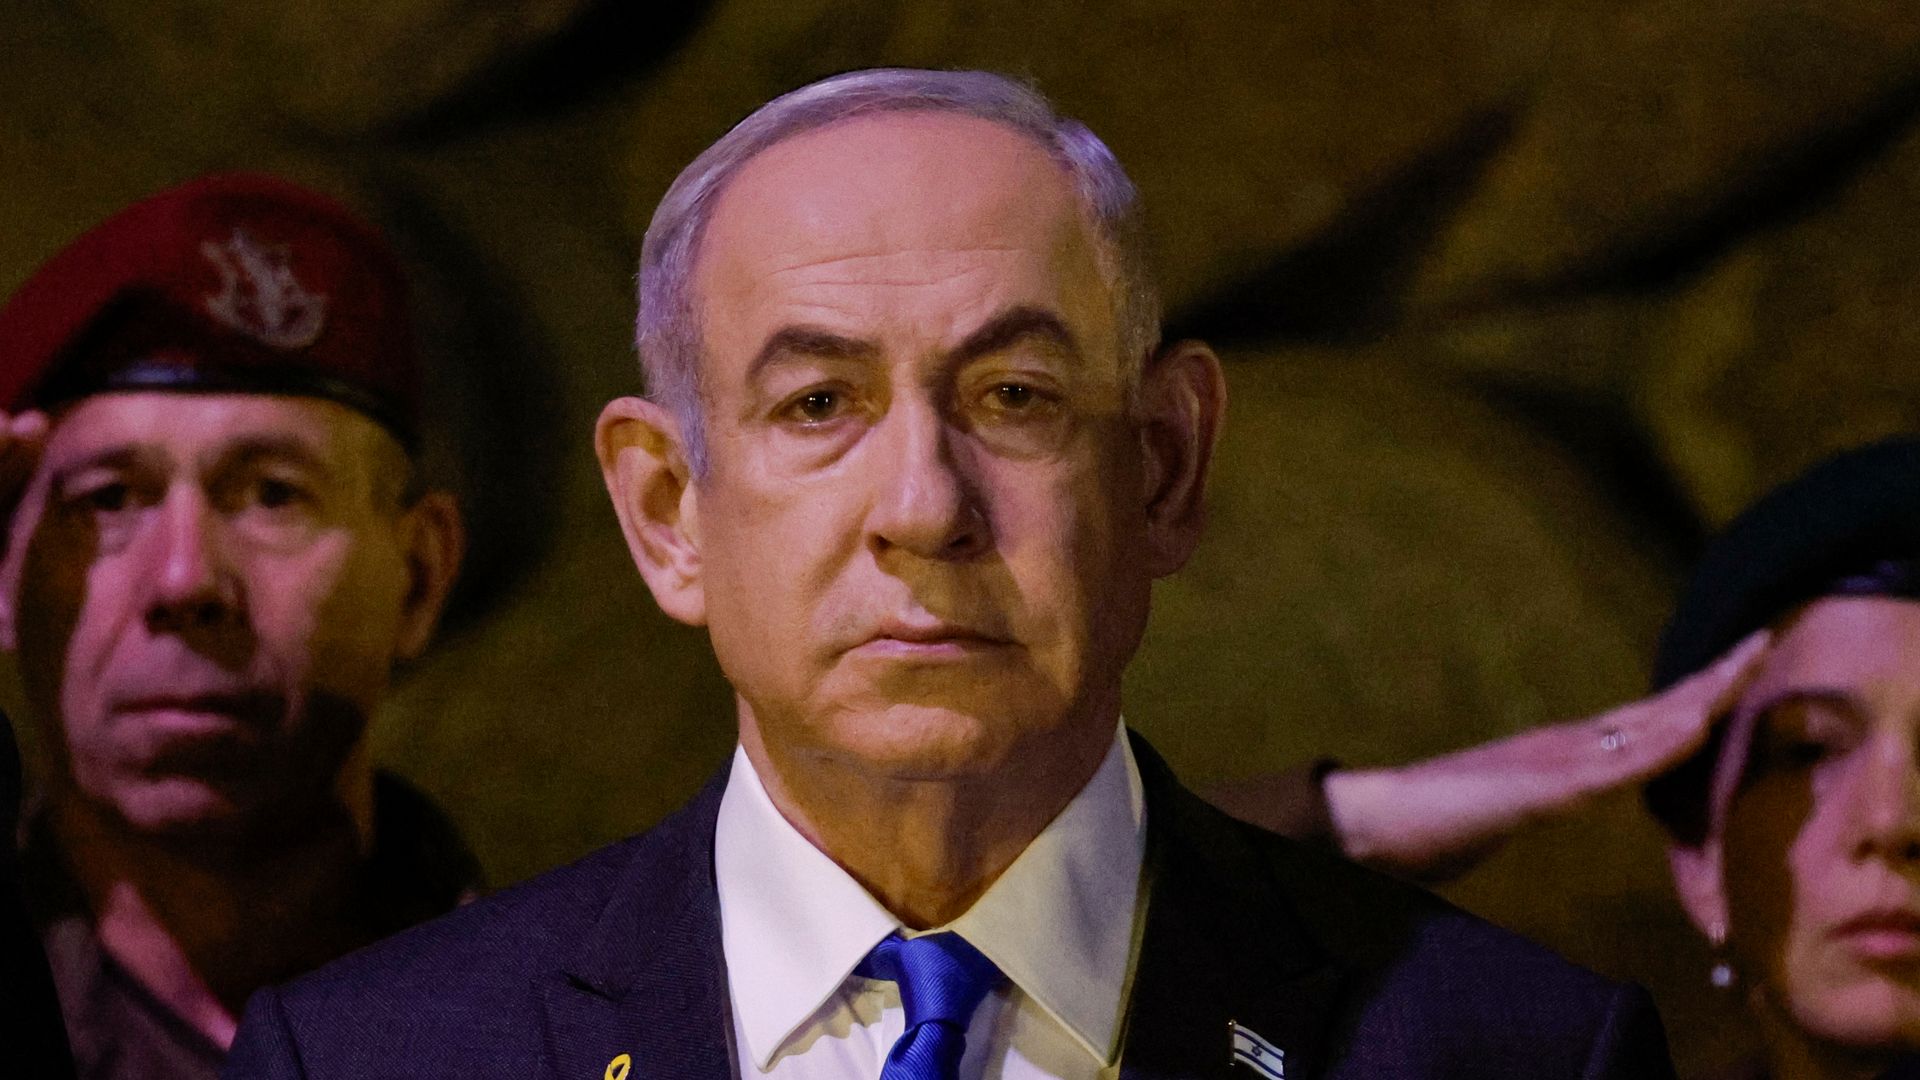 Embattled Netanyahu's choice: Accept ceasefire deal or gamble on Rafah incursion